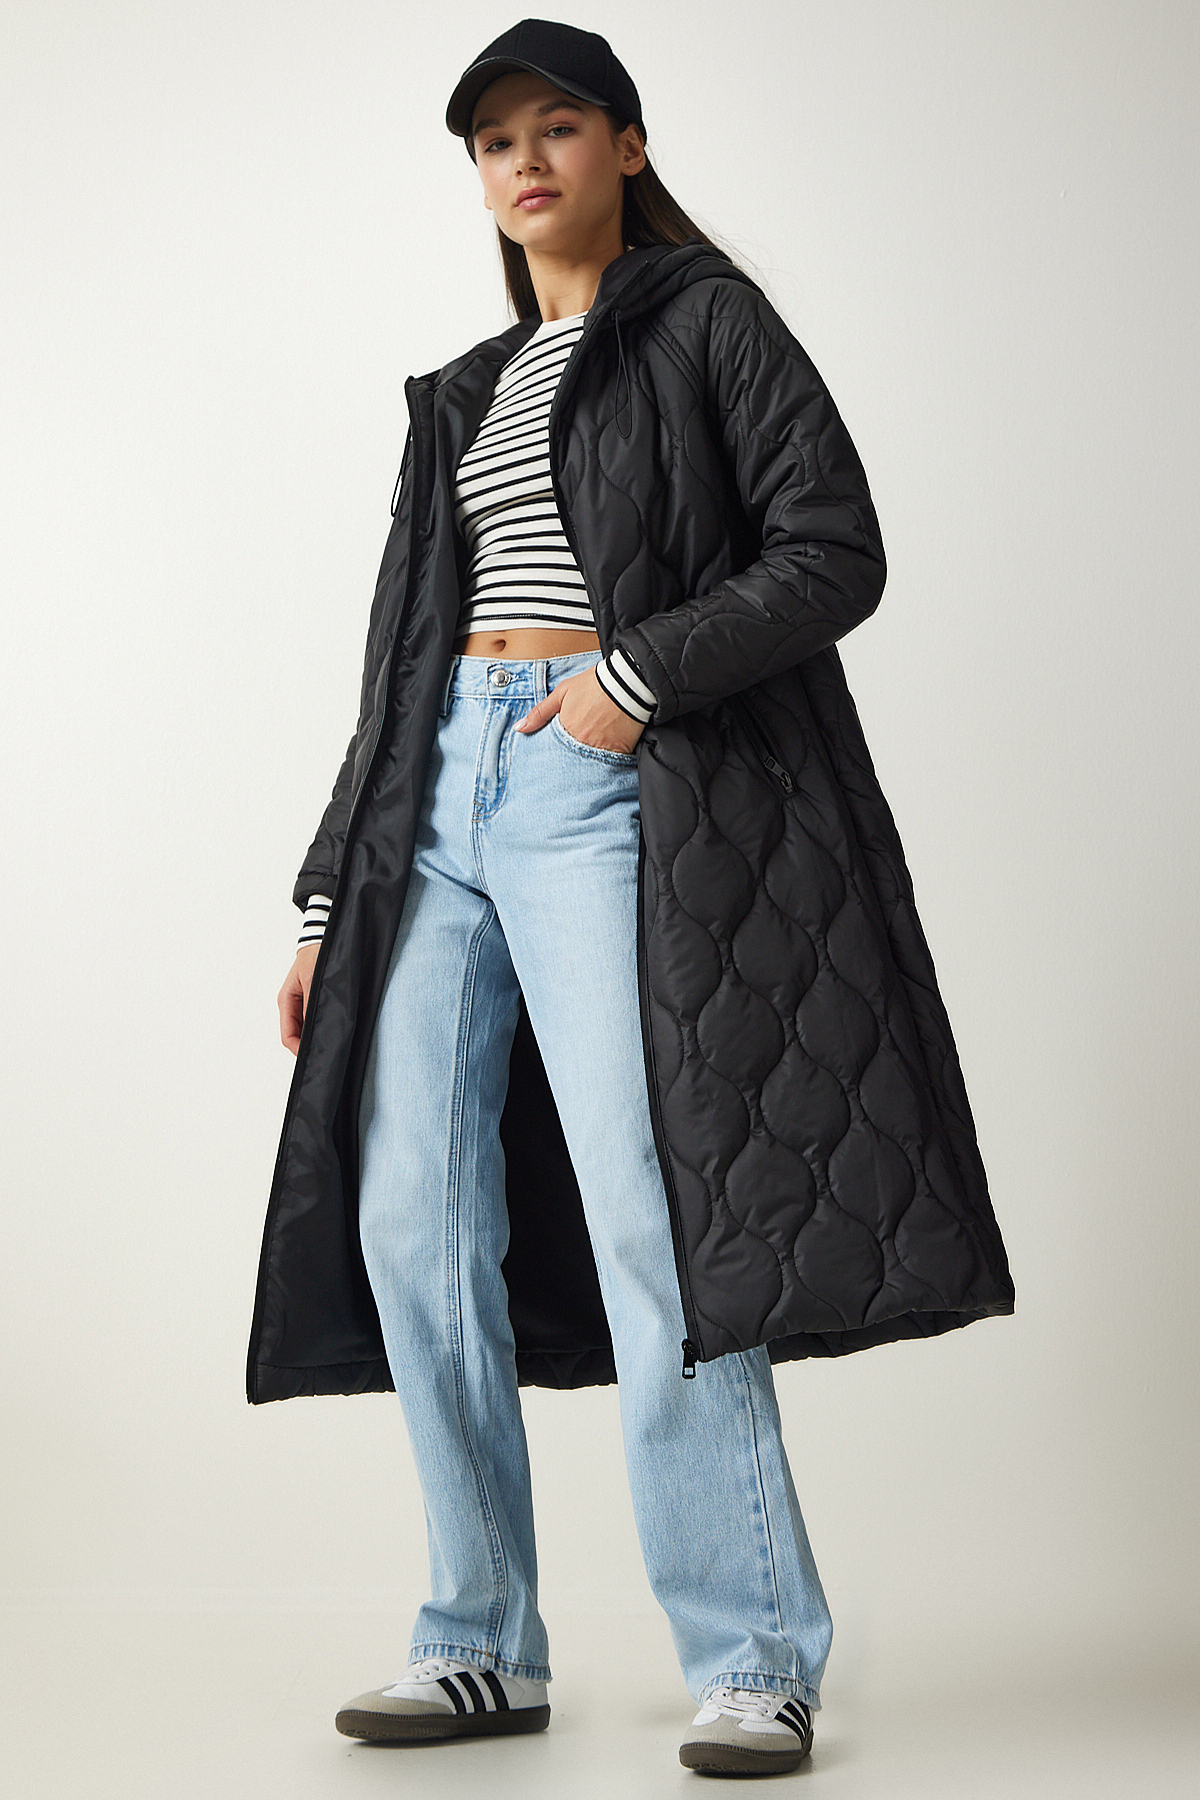 Happiness İstanbul Women's Black Hooded Pocket Quilted Coat